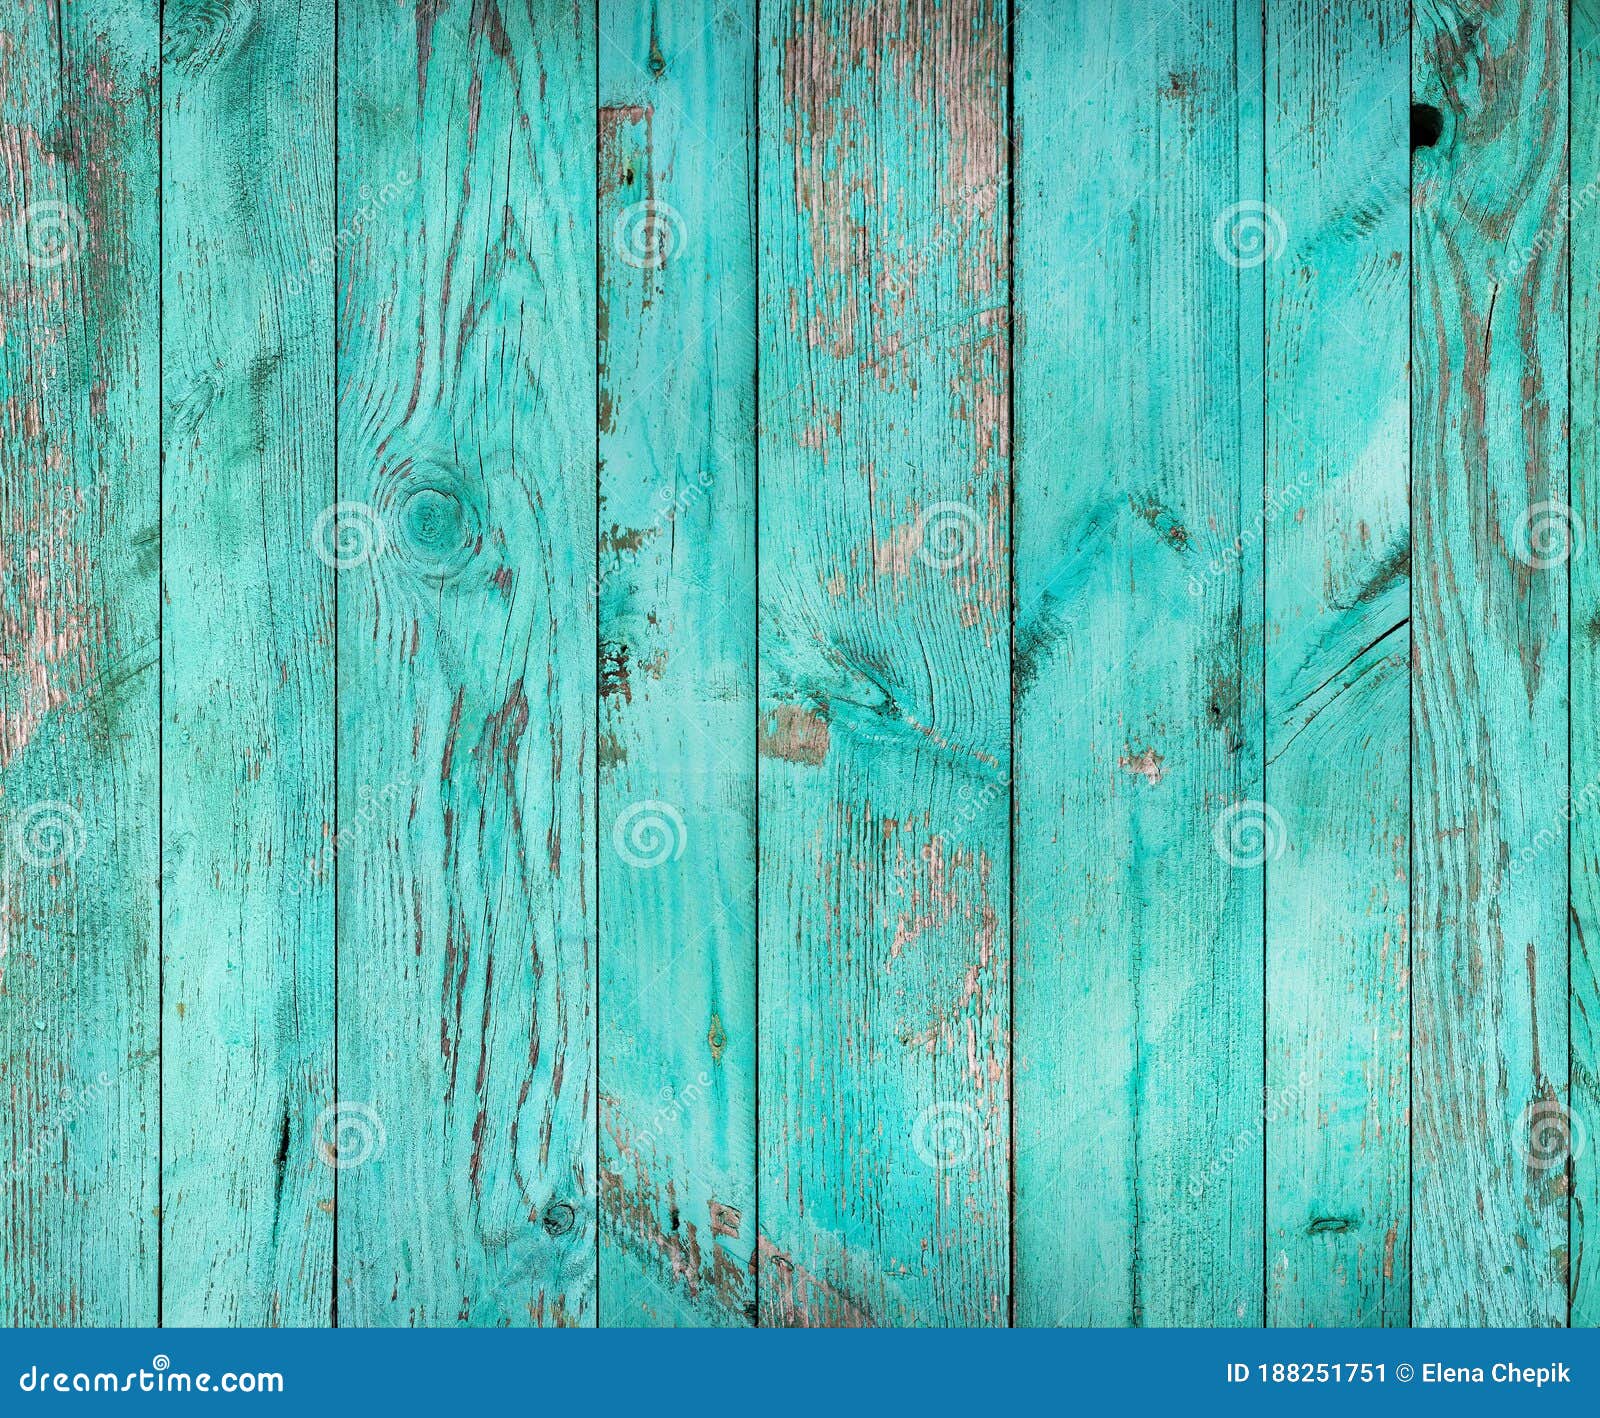 Weathered Blue Wooden Background Texture. Shabby Wood Teal or ...